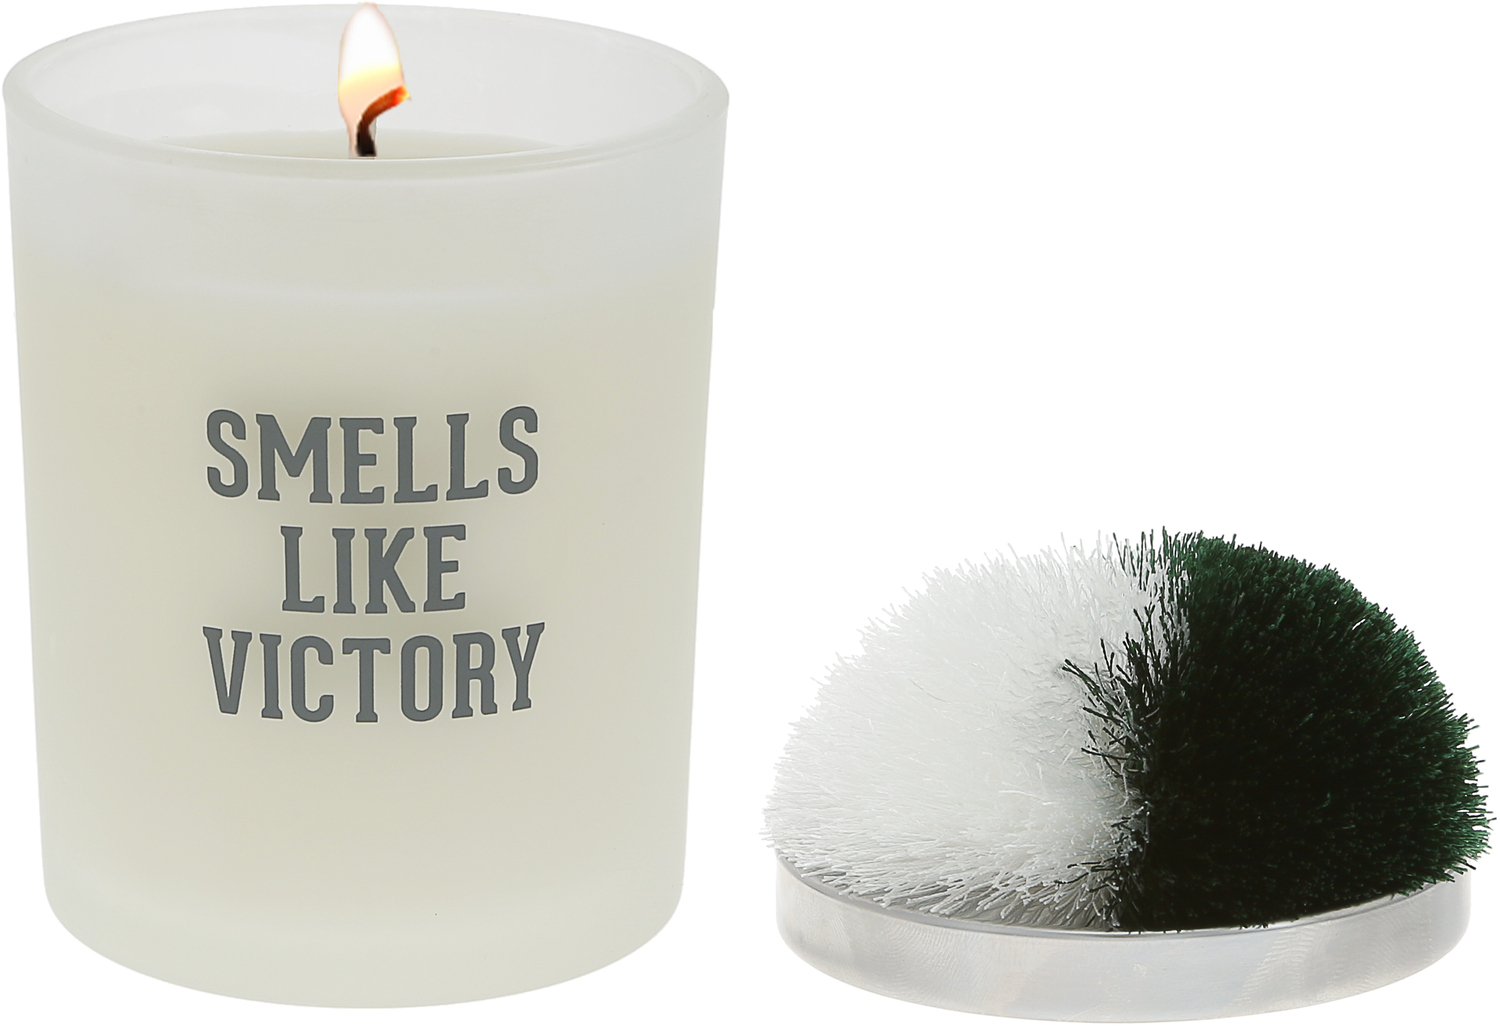 Victory - Green & White by Repre-Scent - Victory - Green & White - 5.5 oz - 100% Soy Wax Candle with Pom Pom Lid
Scent: Tranquility